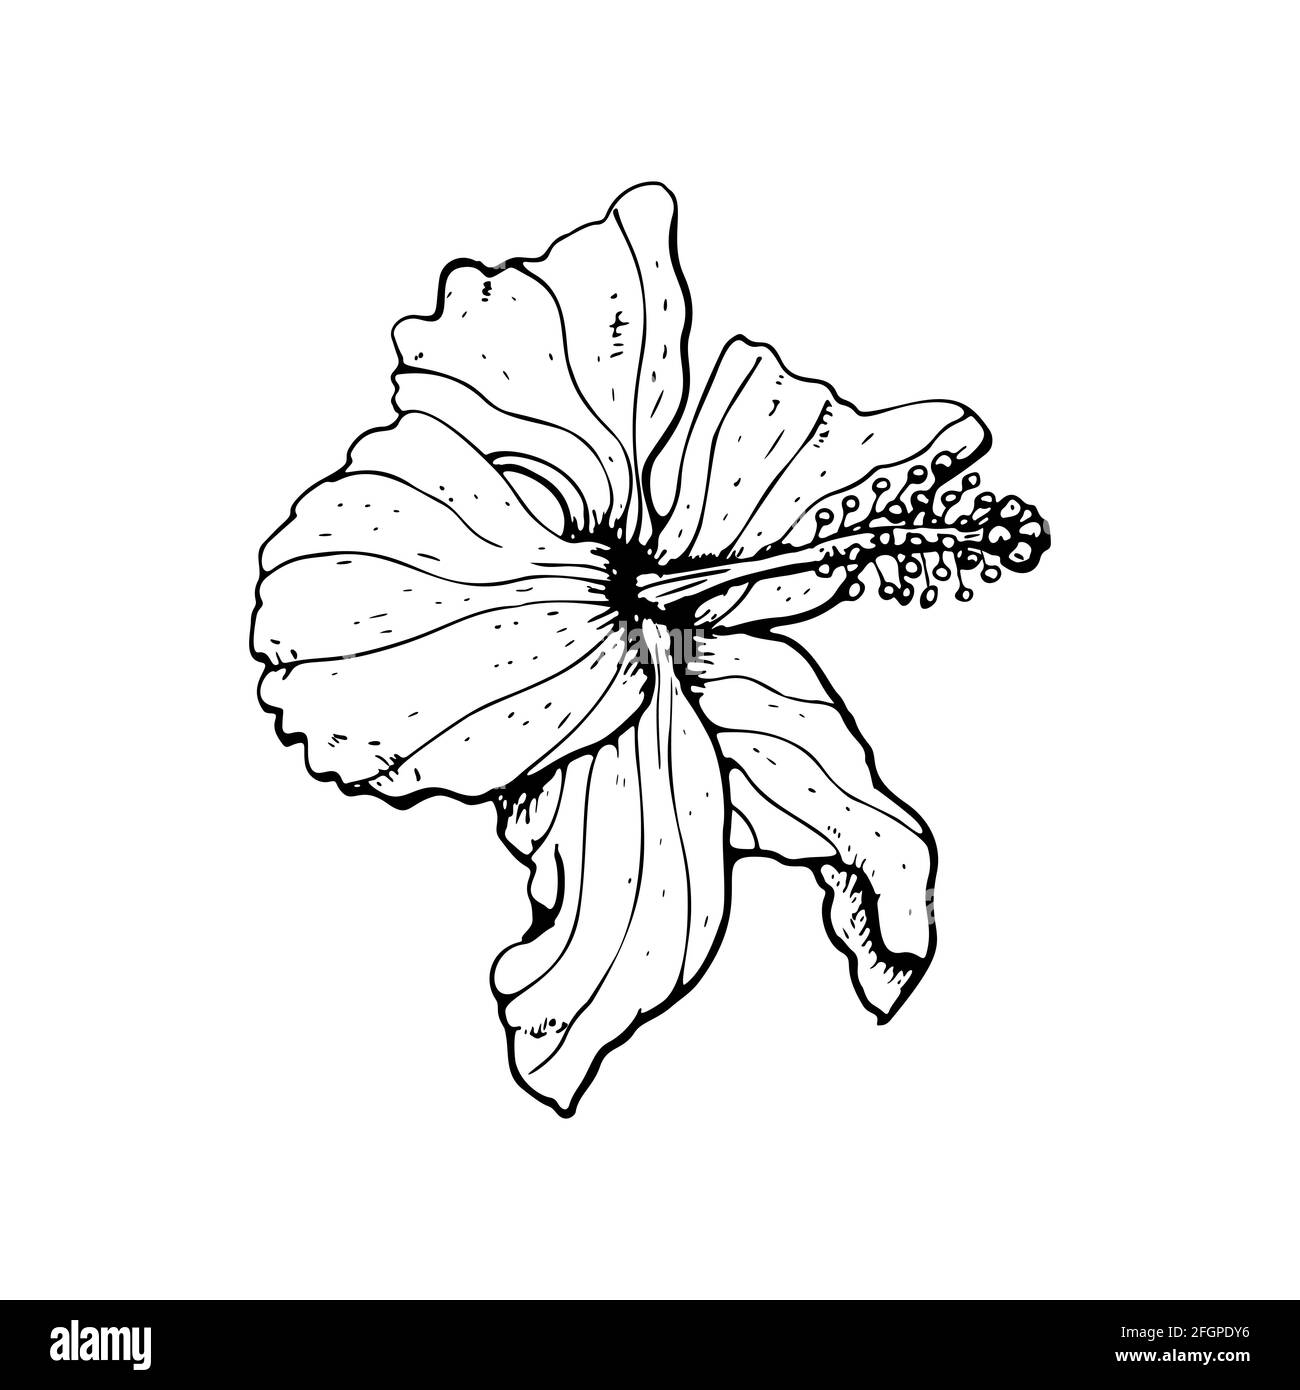 Line art hibiscus flower with black outline isolated on white background. Stock Vector